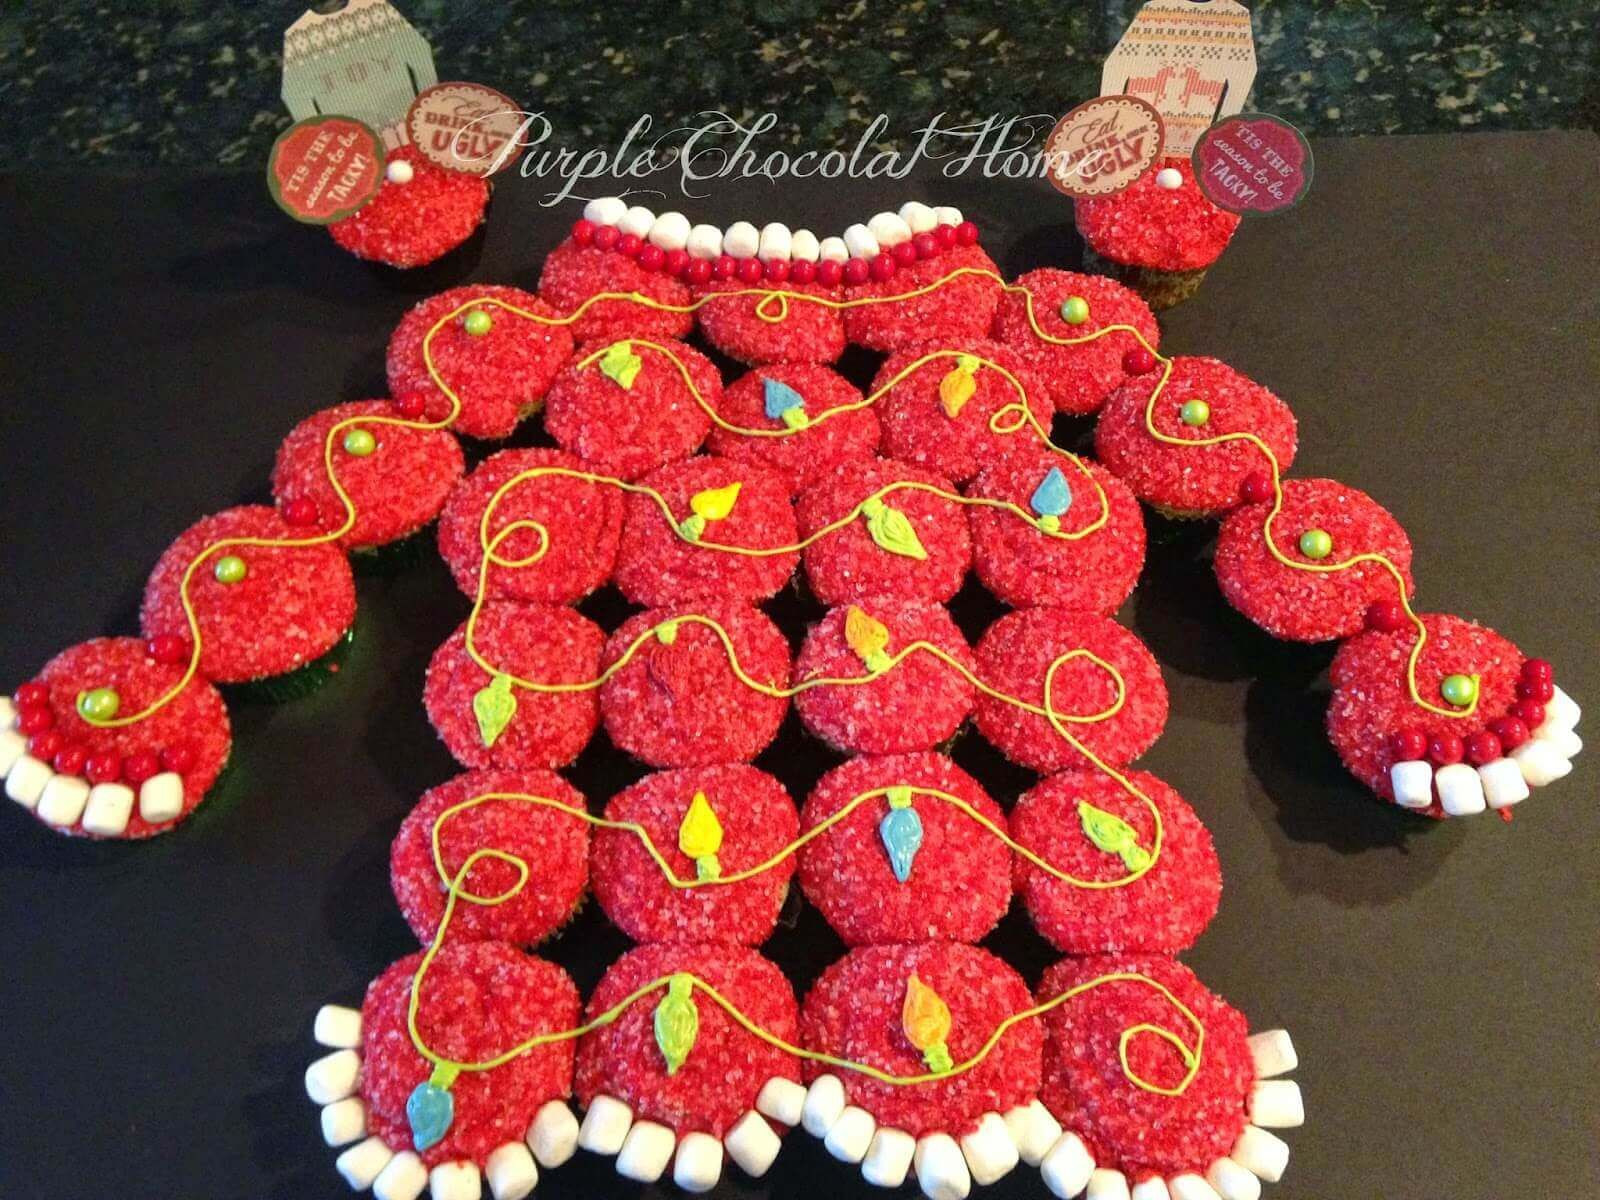 Ugly Christmas Sweater Party Decoration Ideas
 Pin on A Creative Kids Christmas